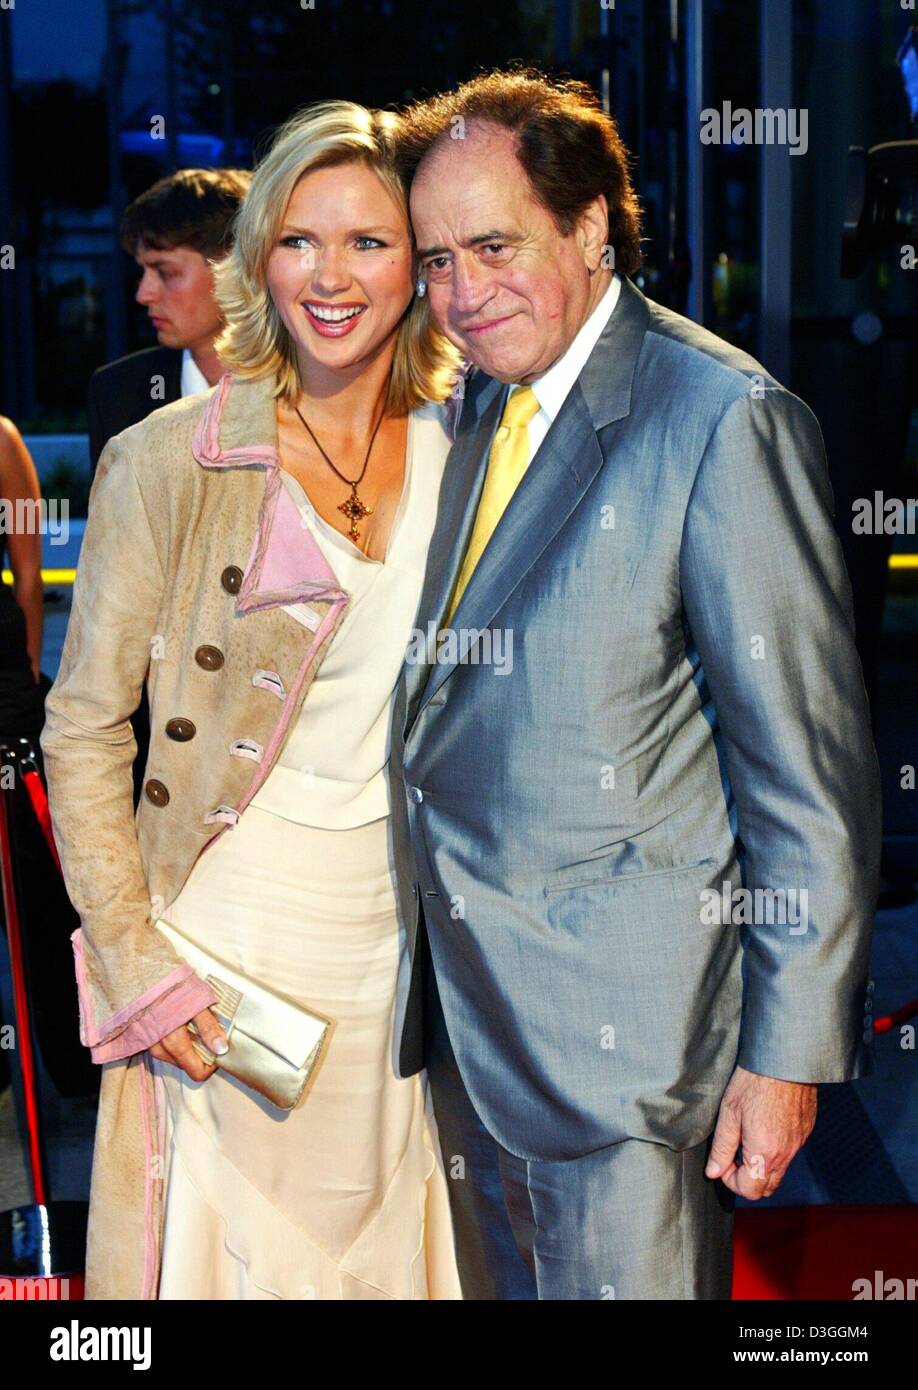 (dpa) - Film producer Arthur Cohn from Switzerland and German actress Veronica Ferres stand next to each other during the reception ahead of the Germany premiere of the film 'Les Choristes' in Berlin, 25 August 2004. The film, dubbed 'Die Kinder des Monsieur Mathieu' (the children of Monsieur Mathieu) in Germany, tells the story of a workless musician in France in 1949, who as a te Stock Photo